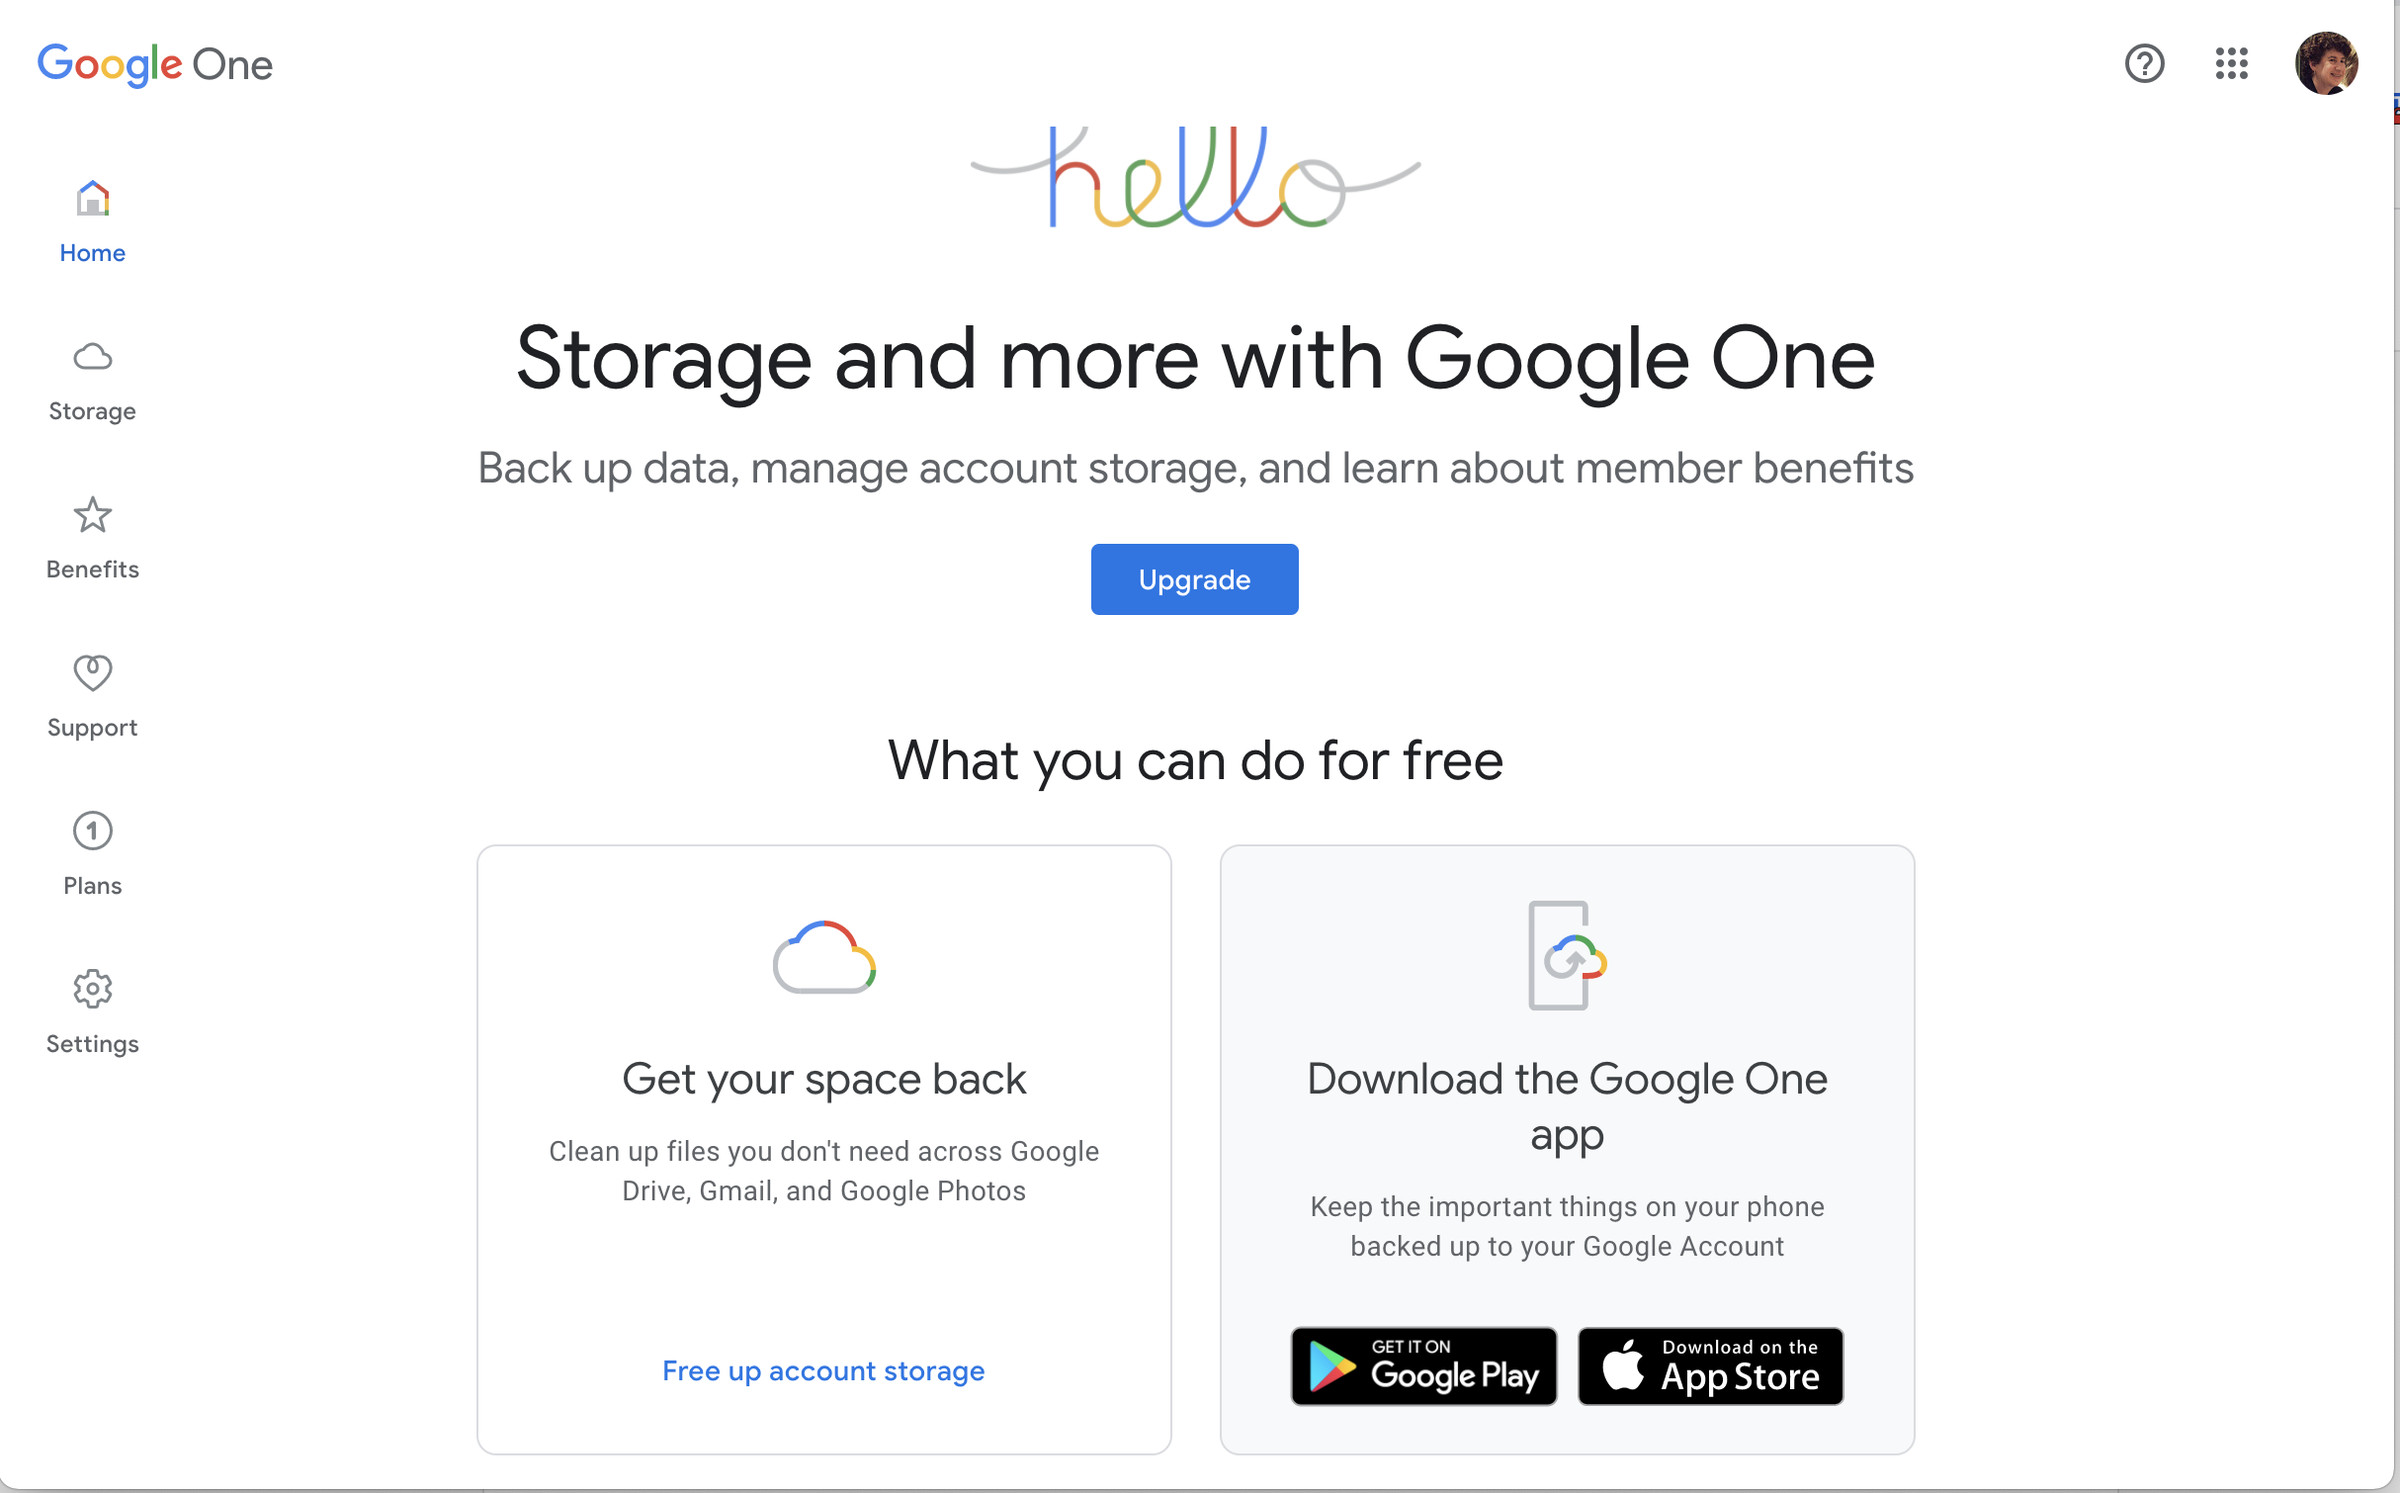 The Google One page includes a tool to help free up storage space.